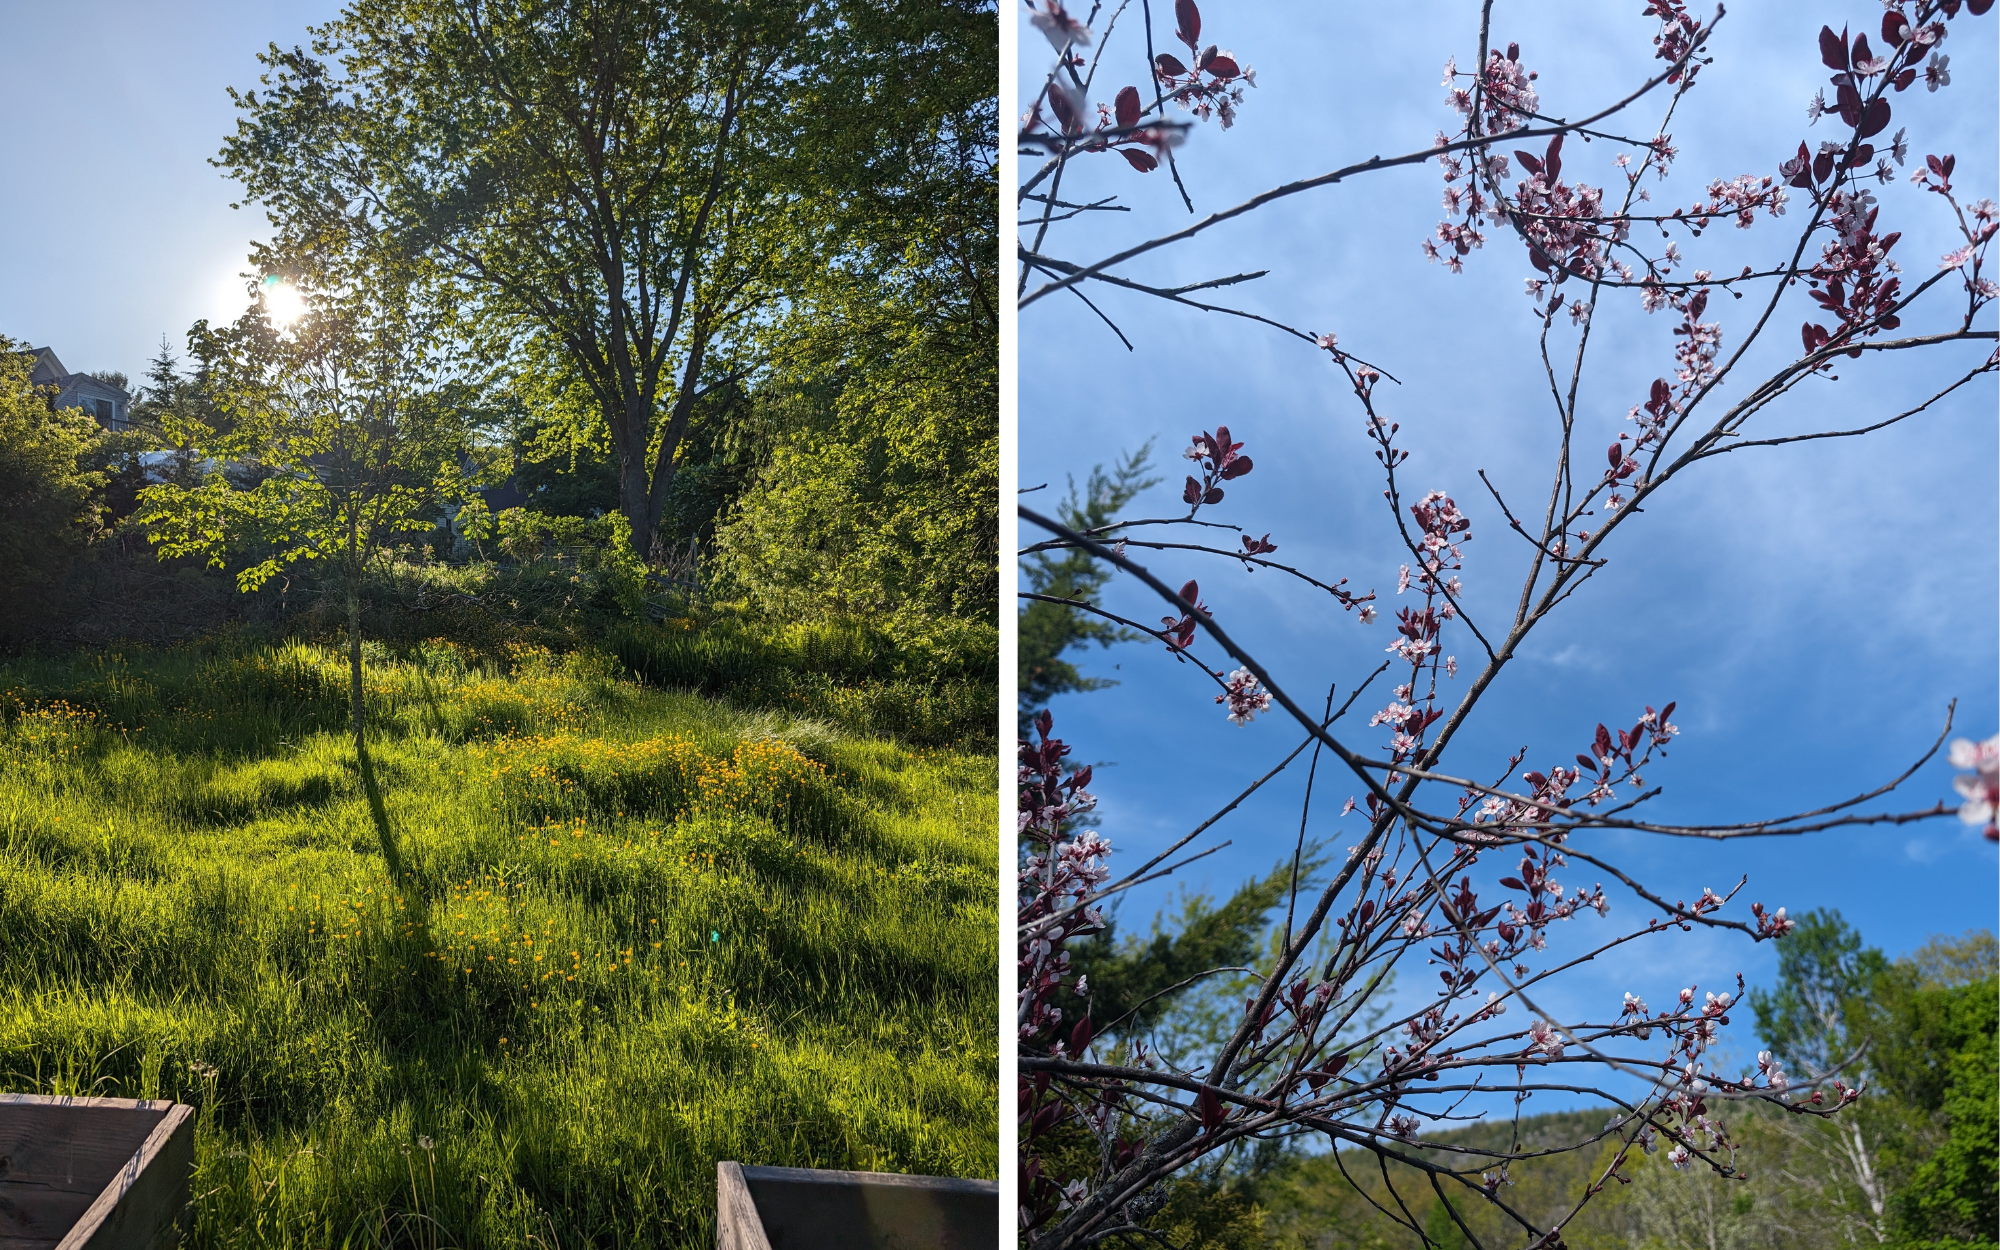 Tall grass grows in the photo on the left while in the photo on the right, cherry plums grow.